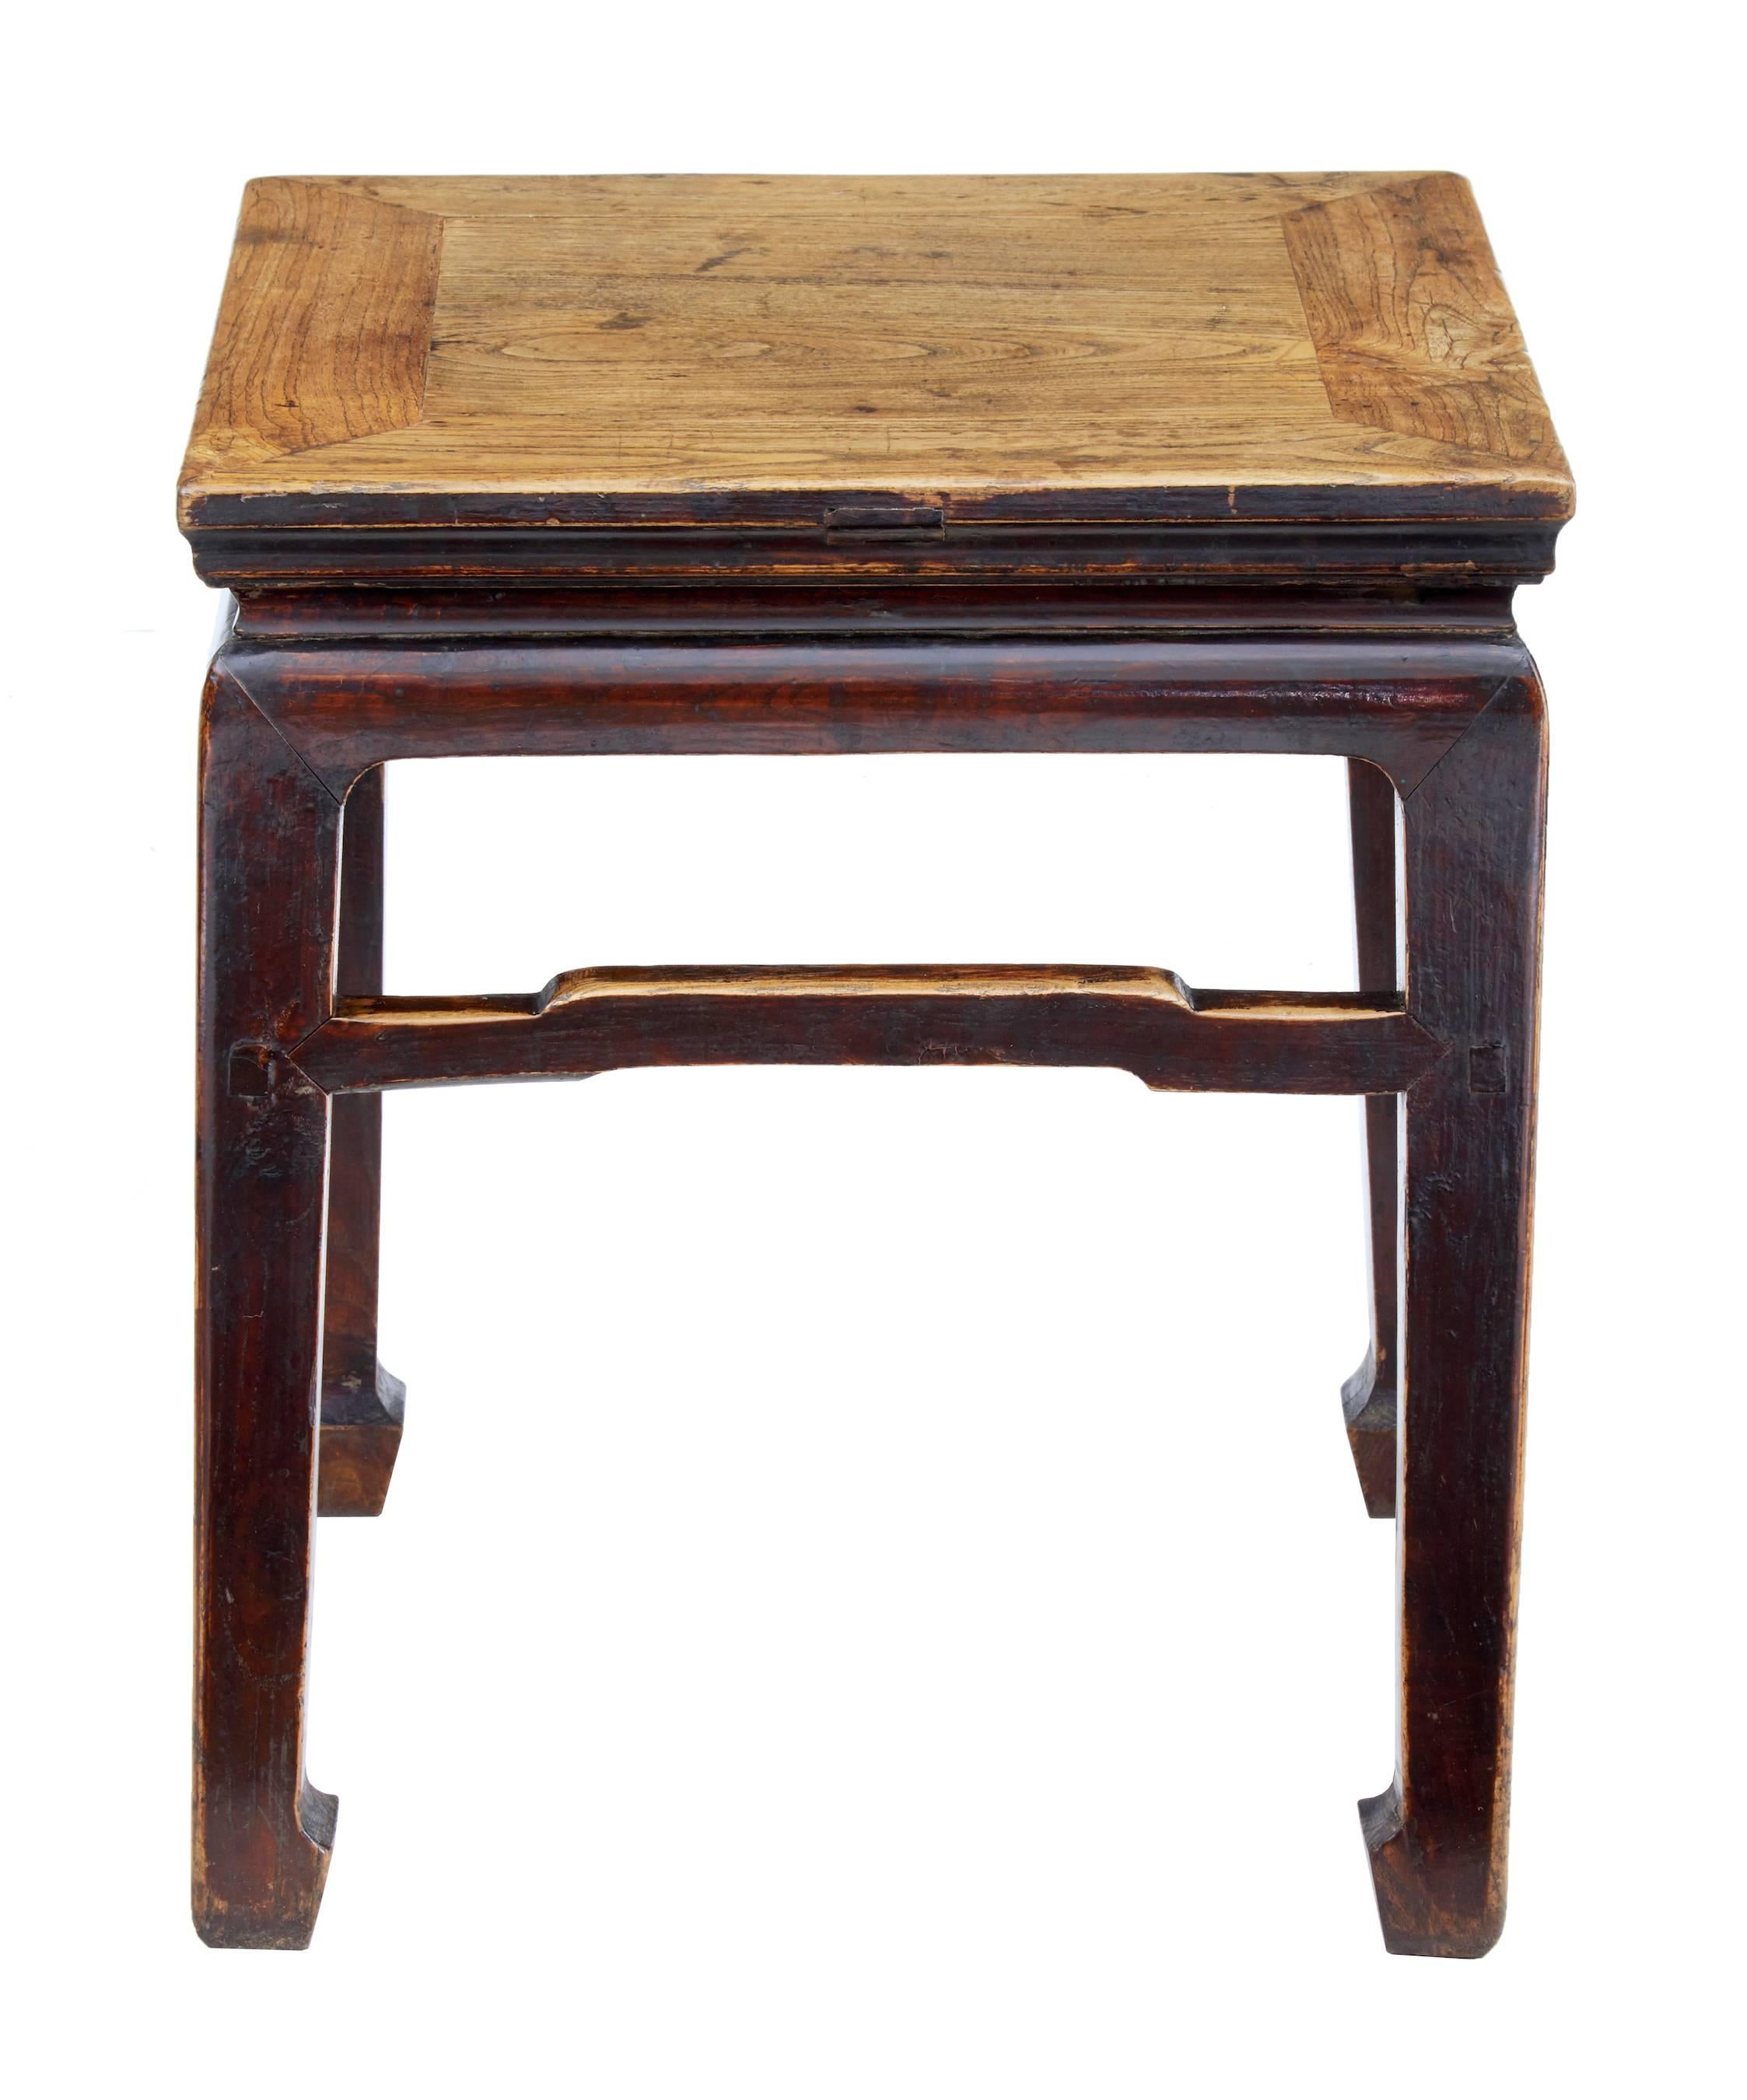 Chinese elm stool, circa 1880.
Dark red lacquered legs and frame with lacquered elm top.
Ideal for use as a lamp / occasional table.
Small areas of fill to top surface.

Measures: Height 20 1/2